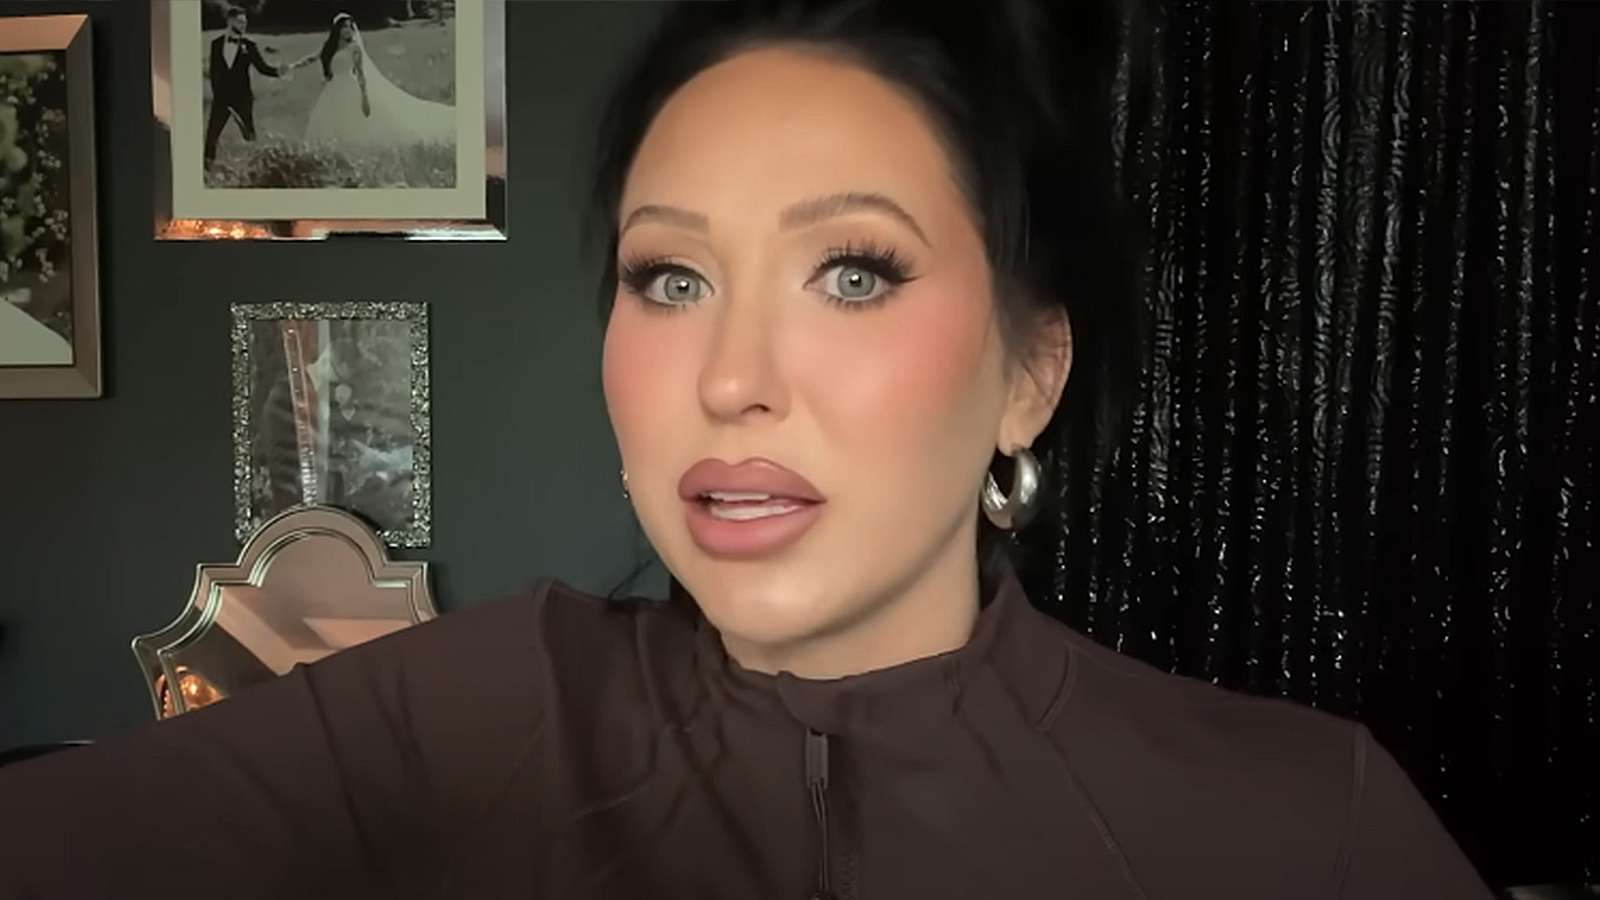 Jaclyn Hill begs Instagram trolls to stop 'awful' comments: “I'm only human”  - Dexerto